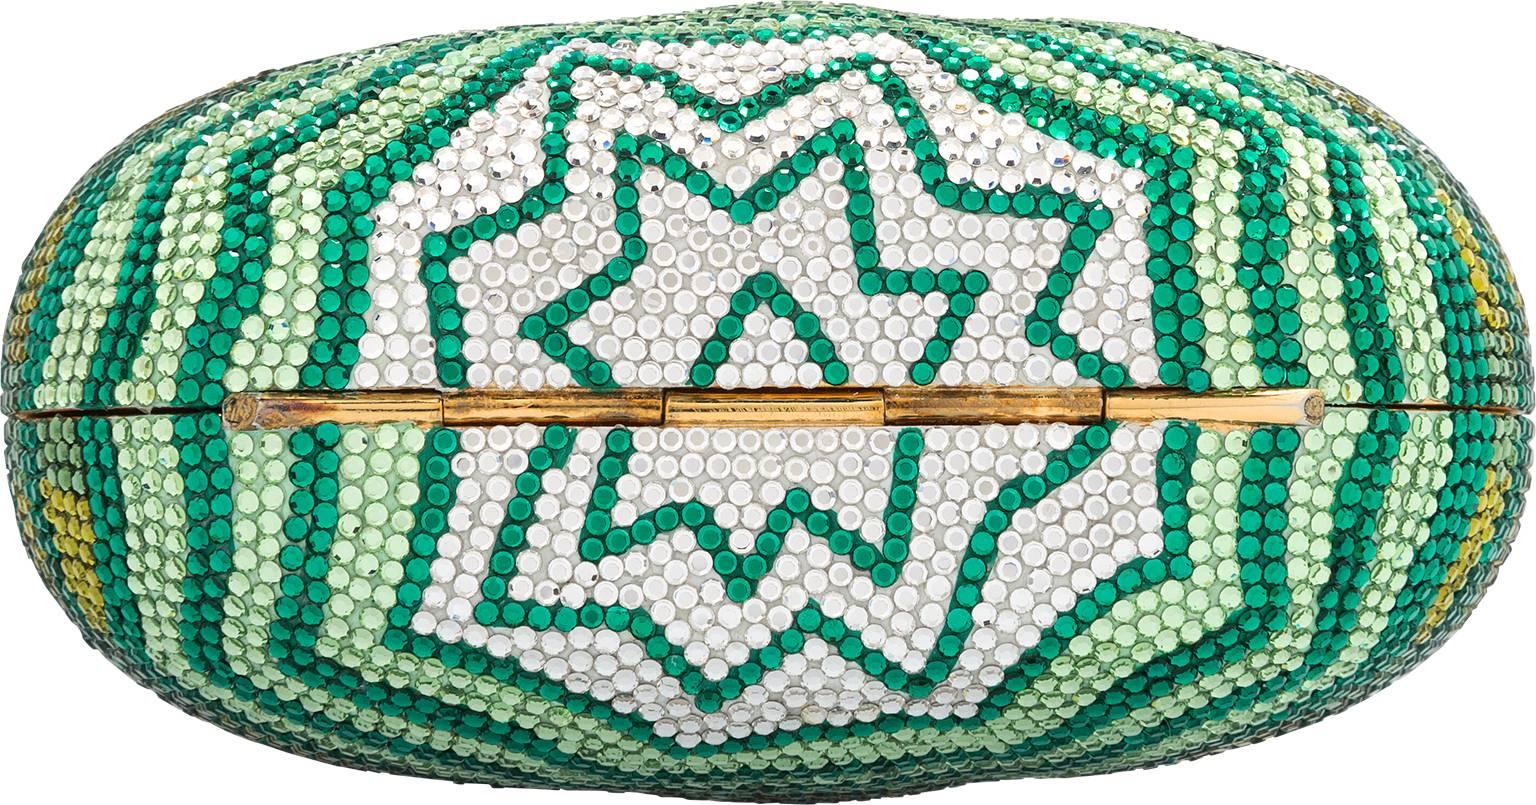 Judith Leiber Full Bead Green & Silver Crystal Miser's Bag Minaudiere Bag In Excellent Condition For Sale In New York, NY